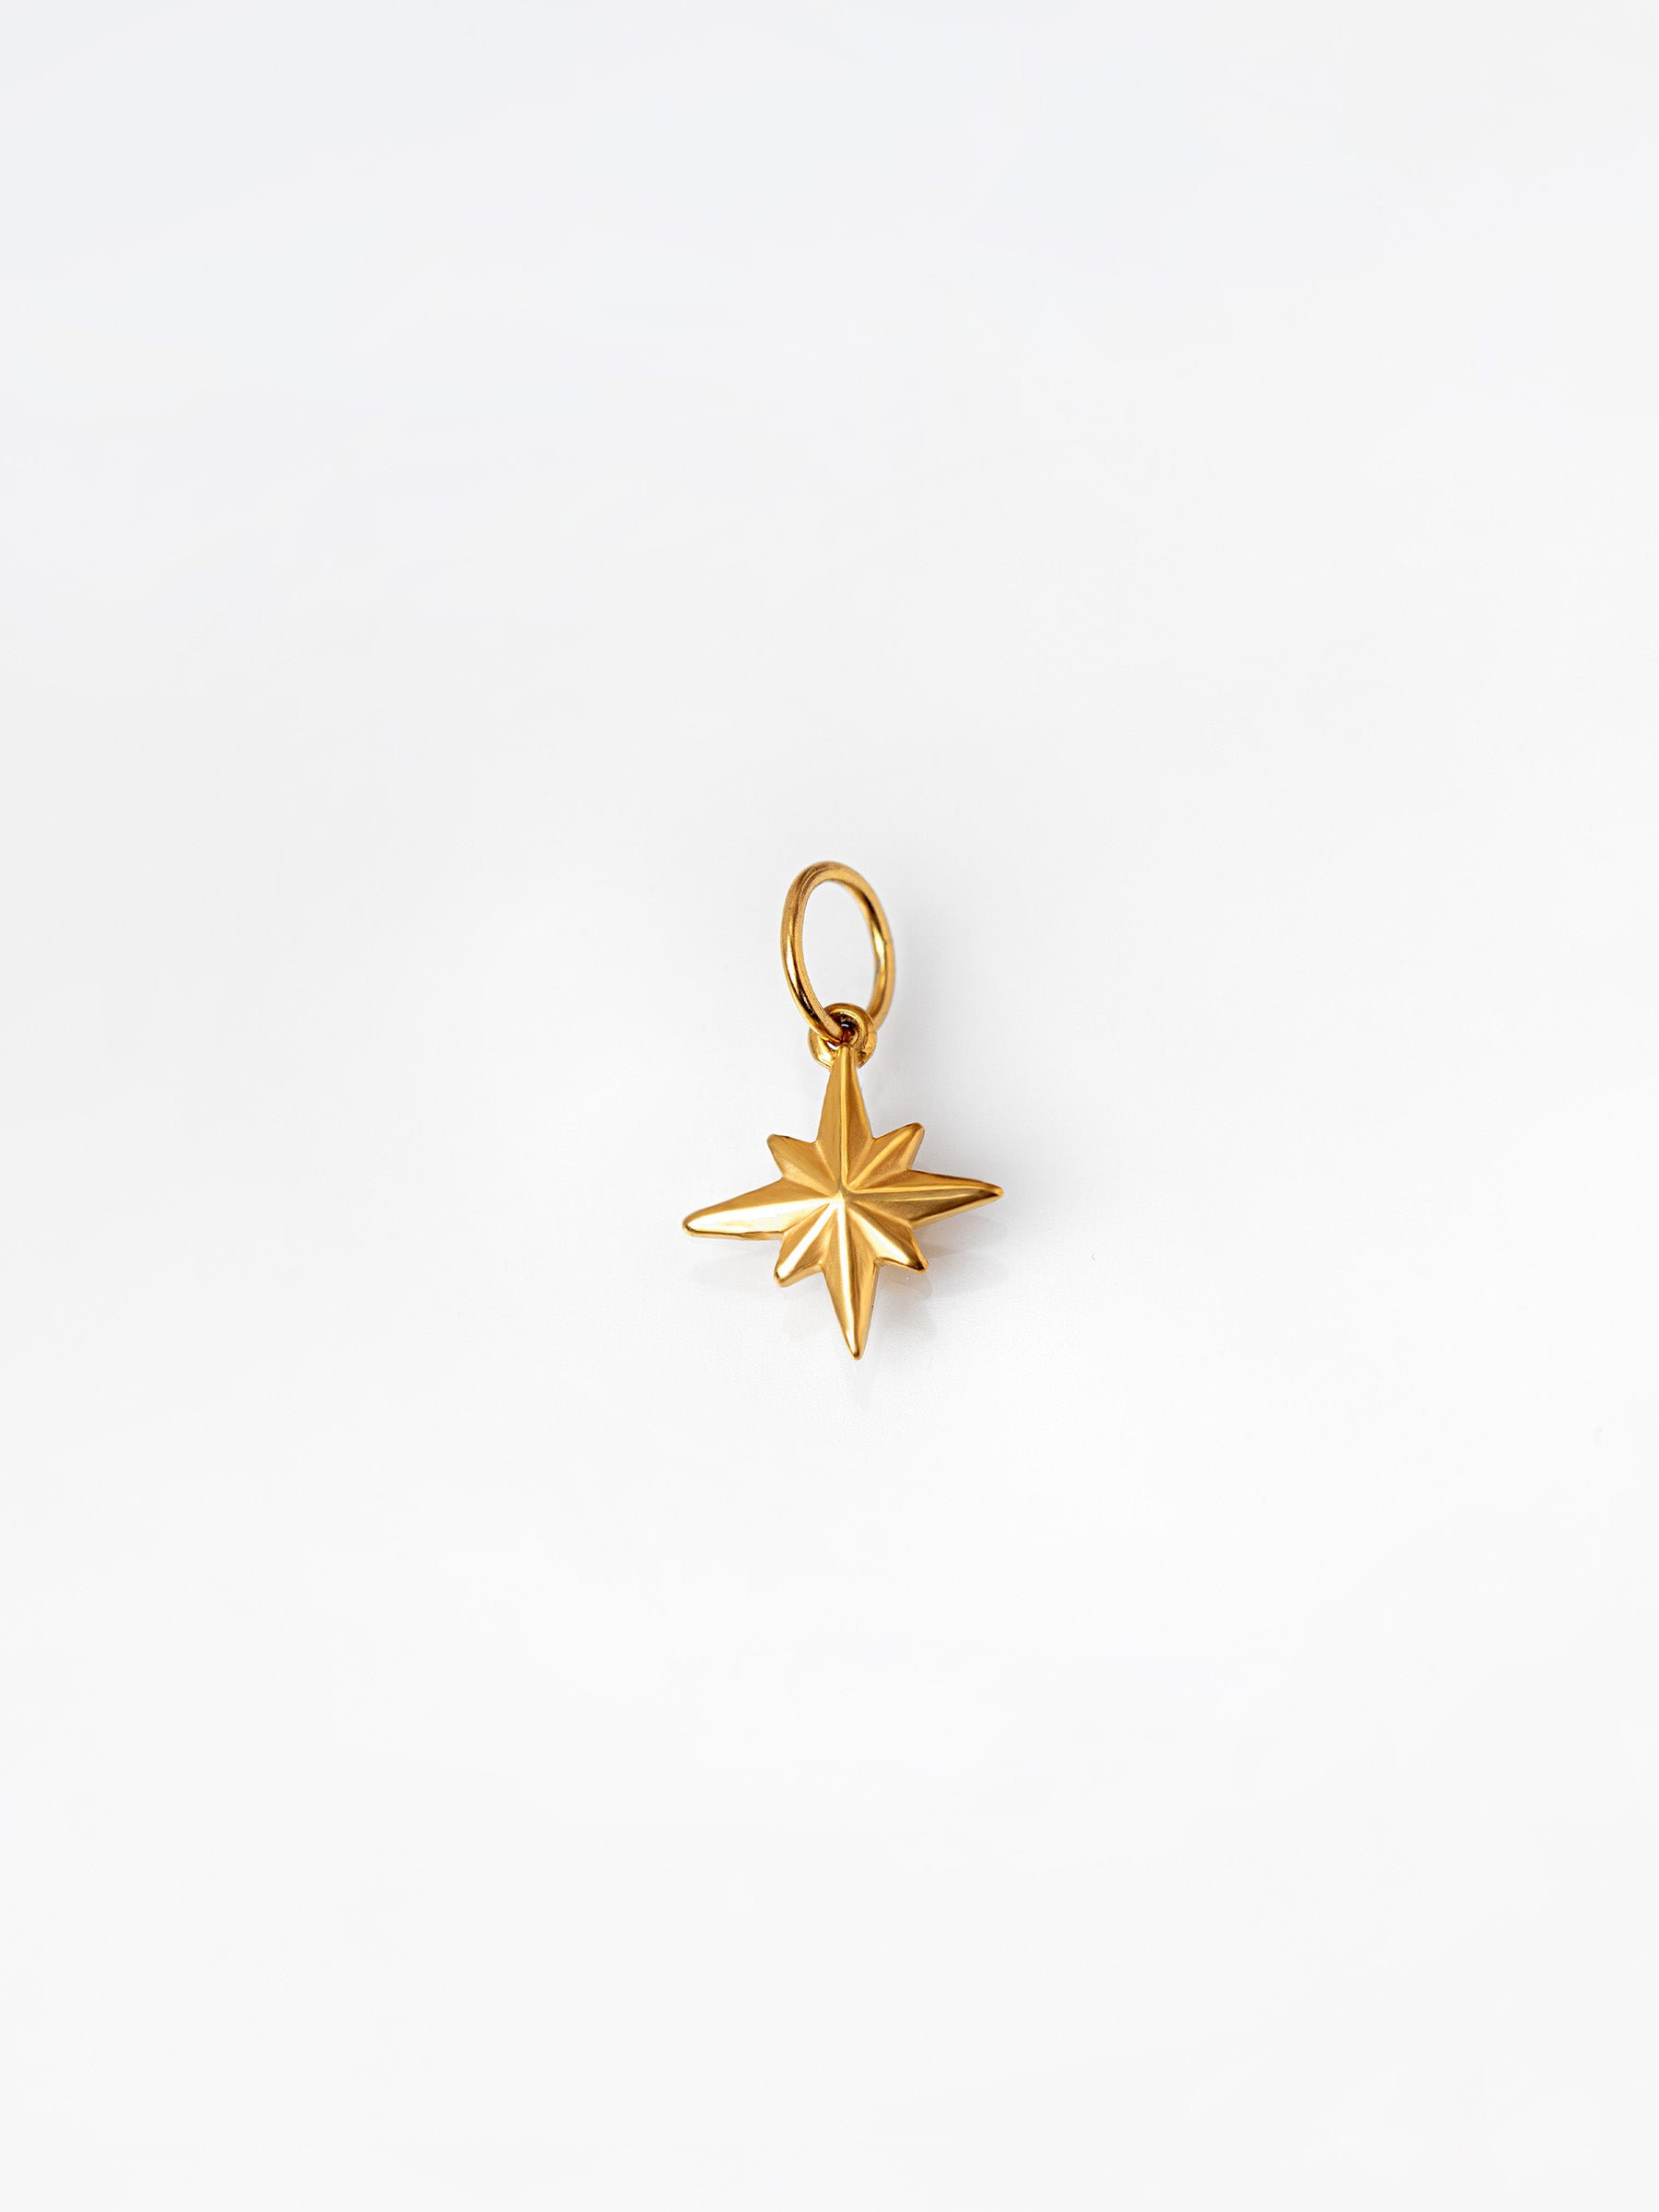 Gold Tiny Solid North Star Pendant / Charm